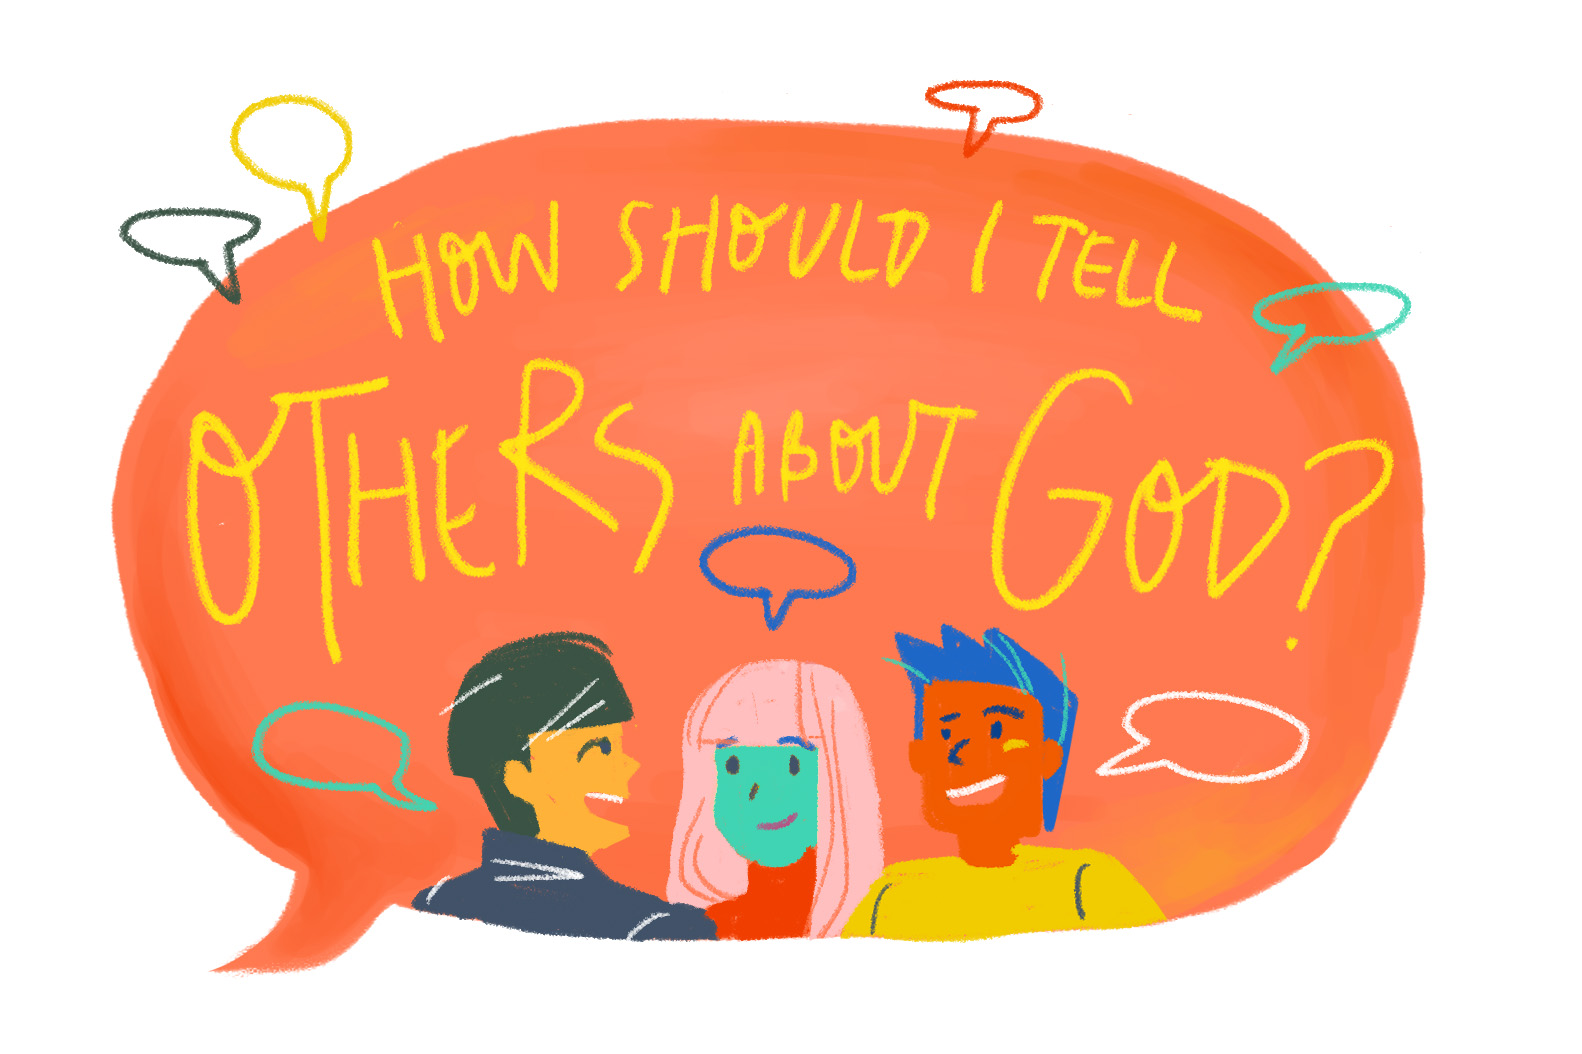 Tell others about God